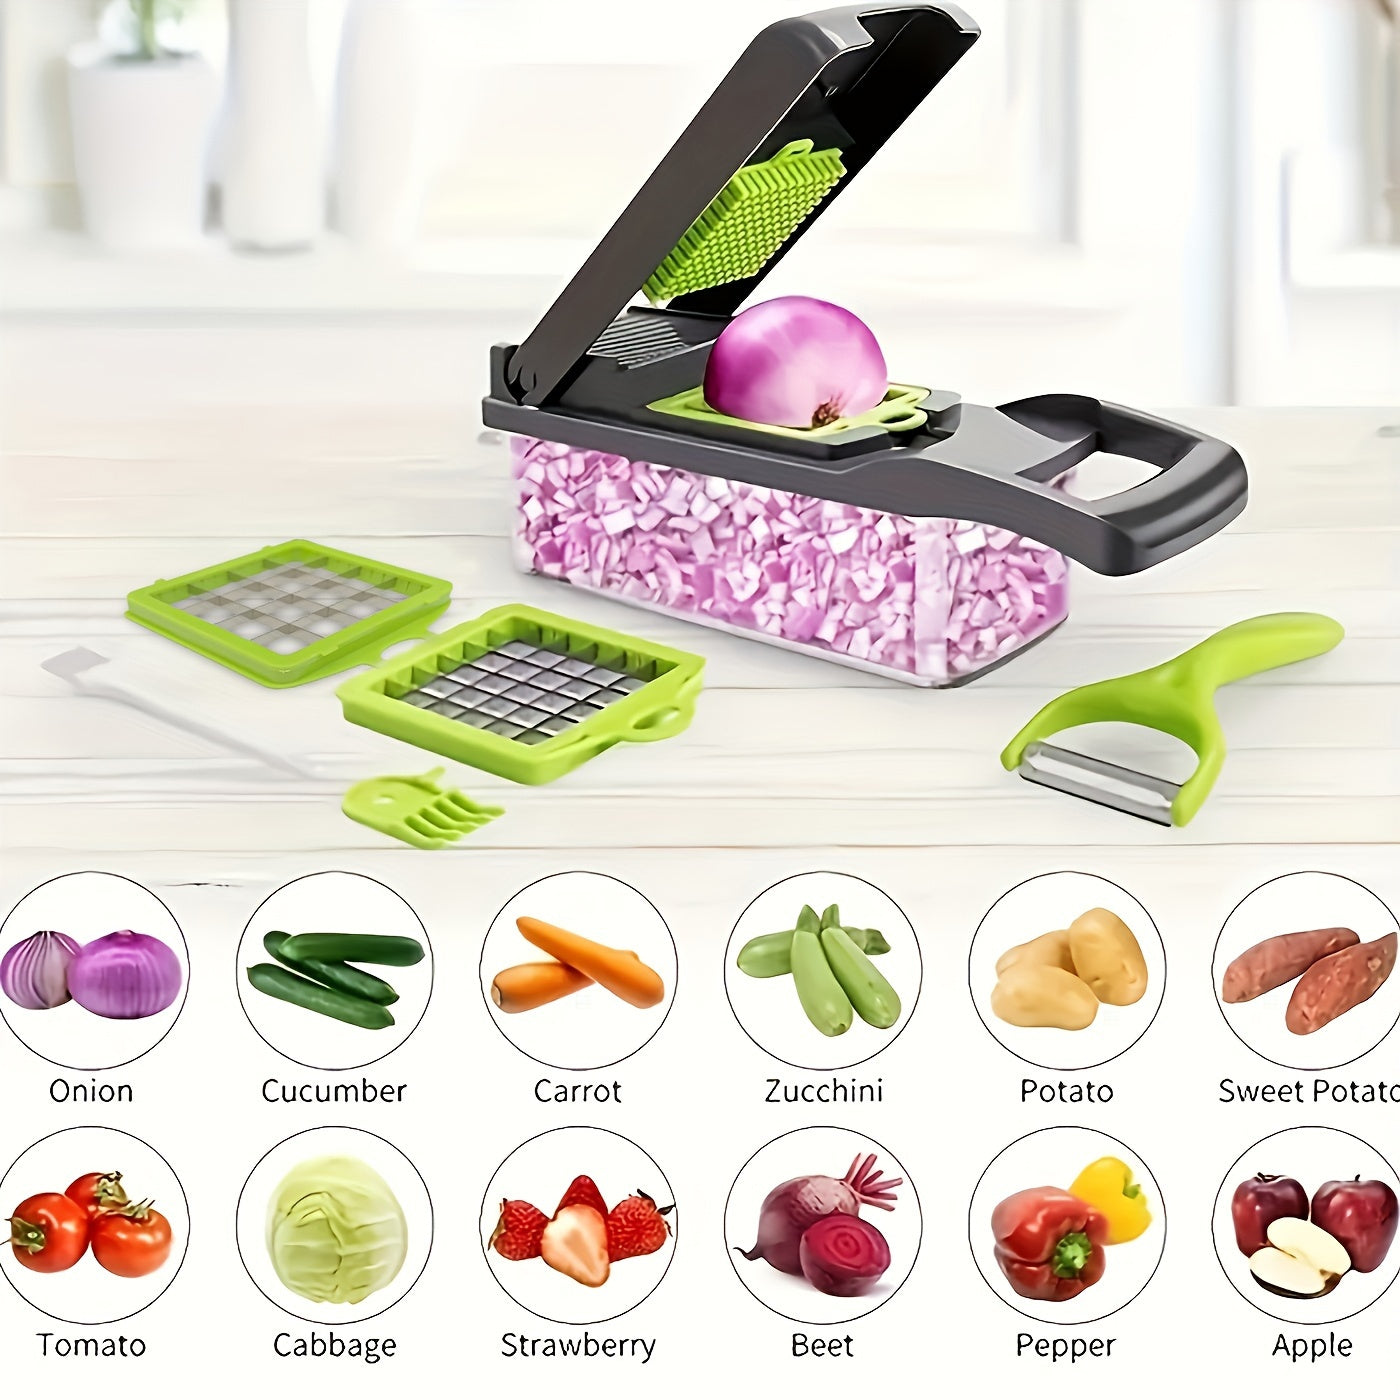 "16-Piece Vegetable Chopper and Fruit Slicer Set with Interchangeable Blades, Container, and Handle - Kitchen Gadgets for Restaurants and Food Trucks"